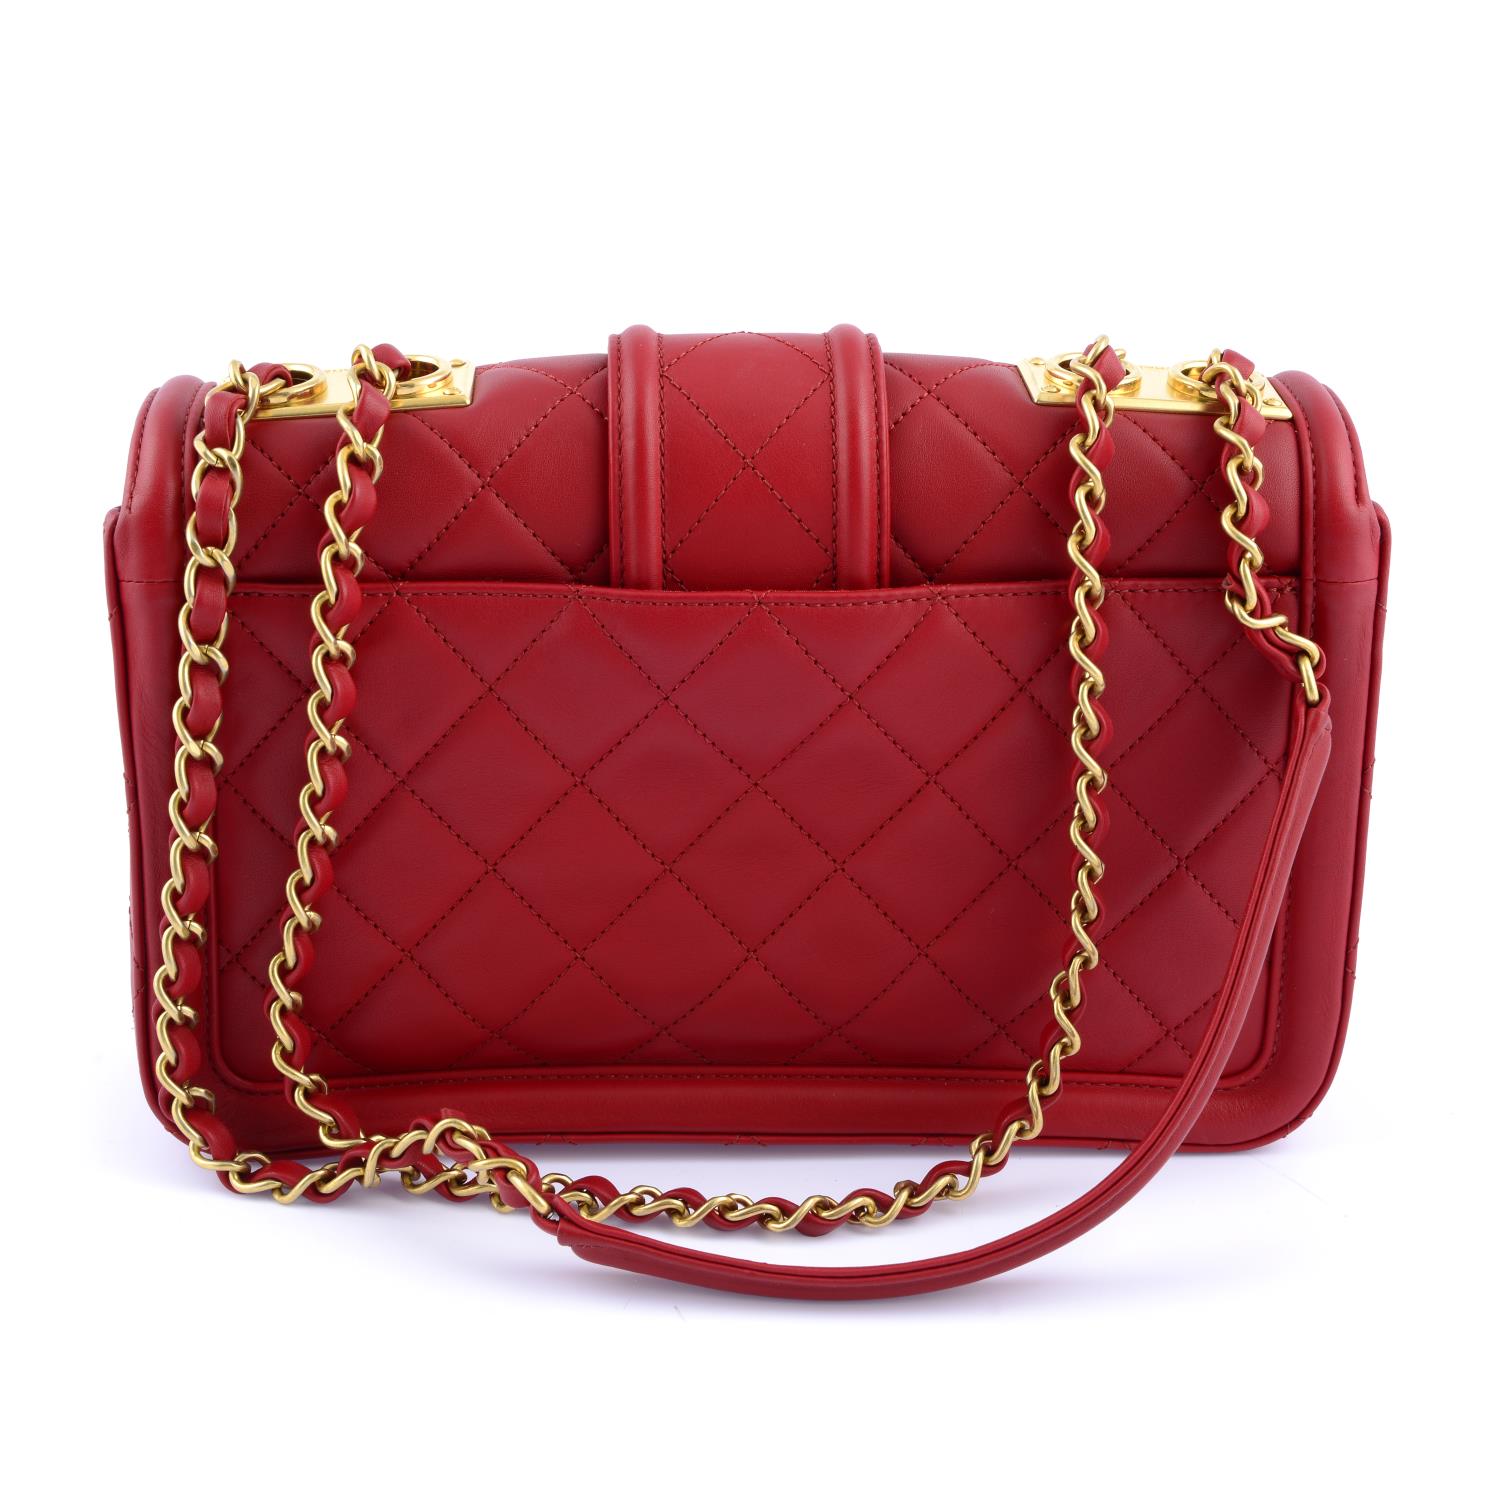 CHANEL - a red quilted Elegant handbag. - Image 2 of 4